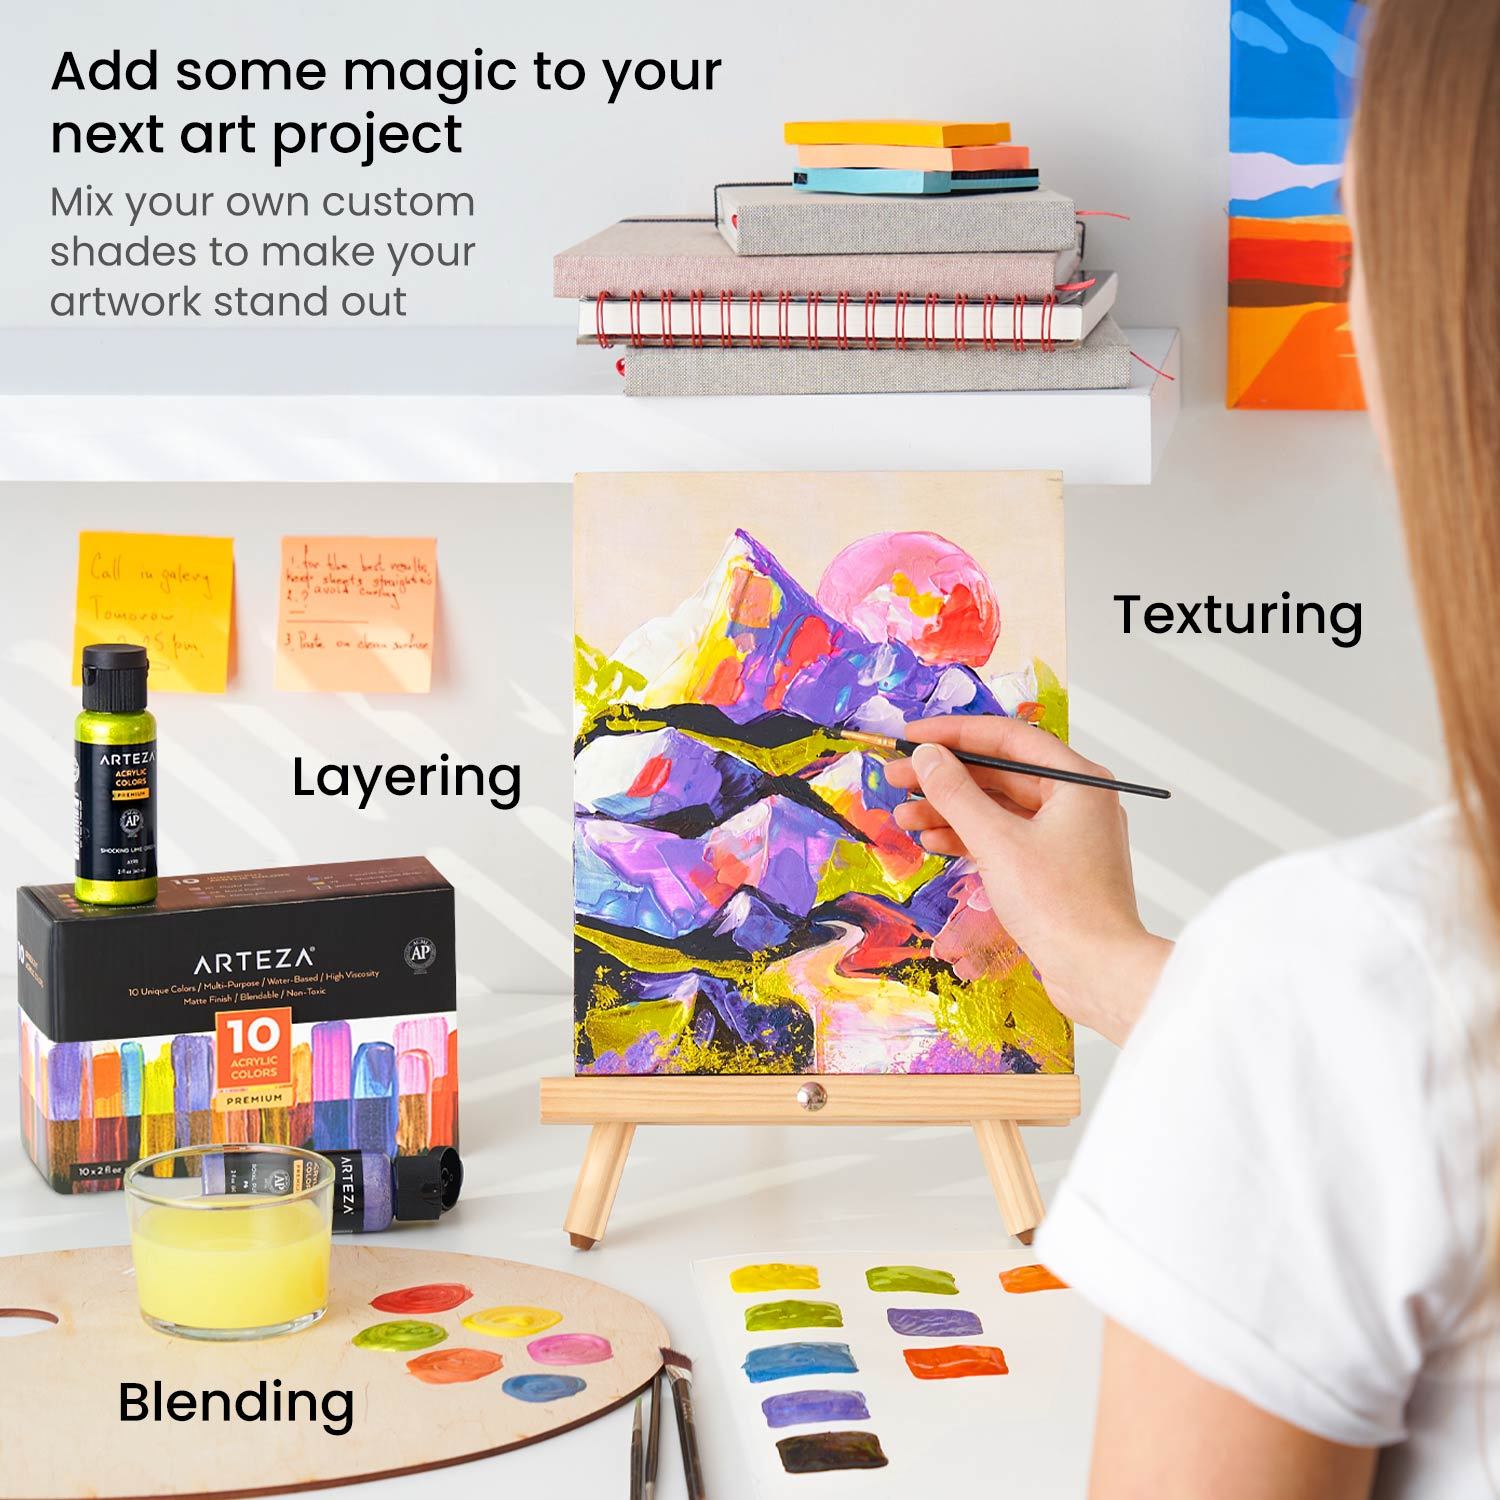 Acrylic Paint on Paper - Reviewing the Best Paper for Acrylic Paint